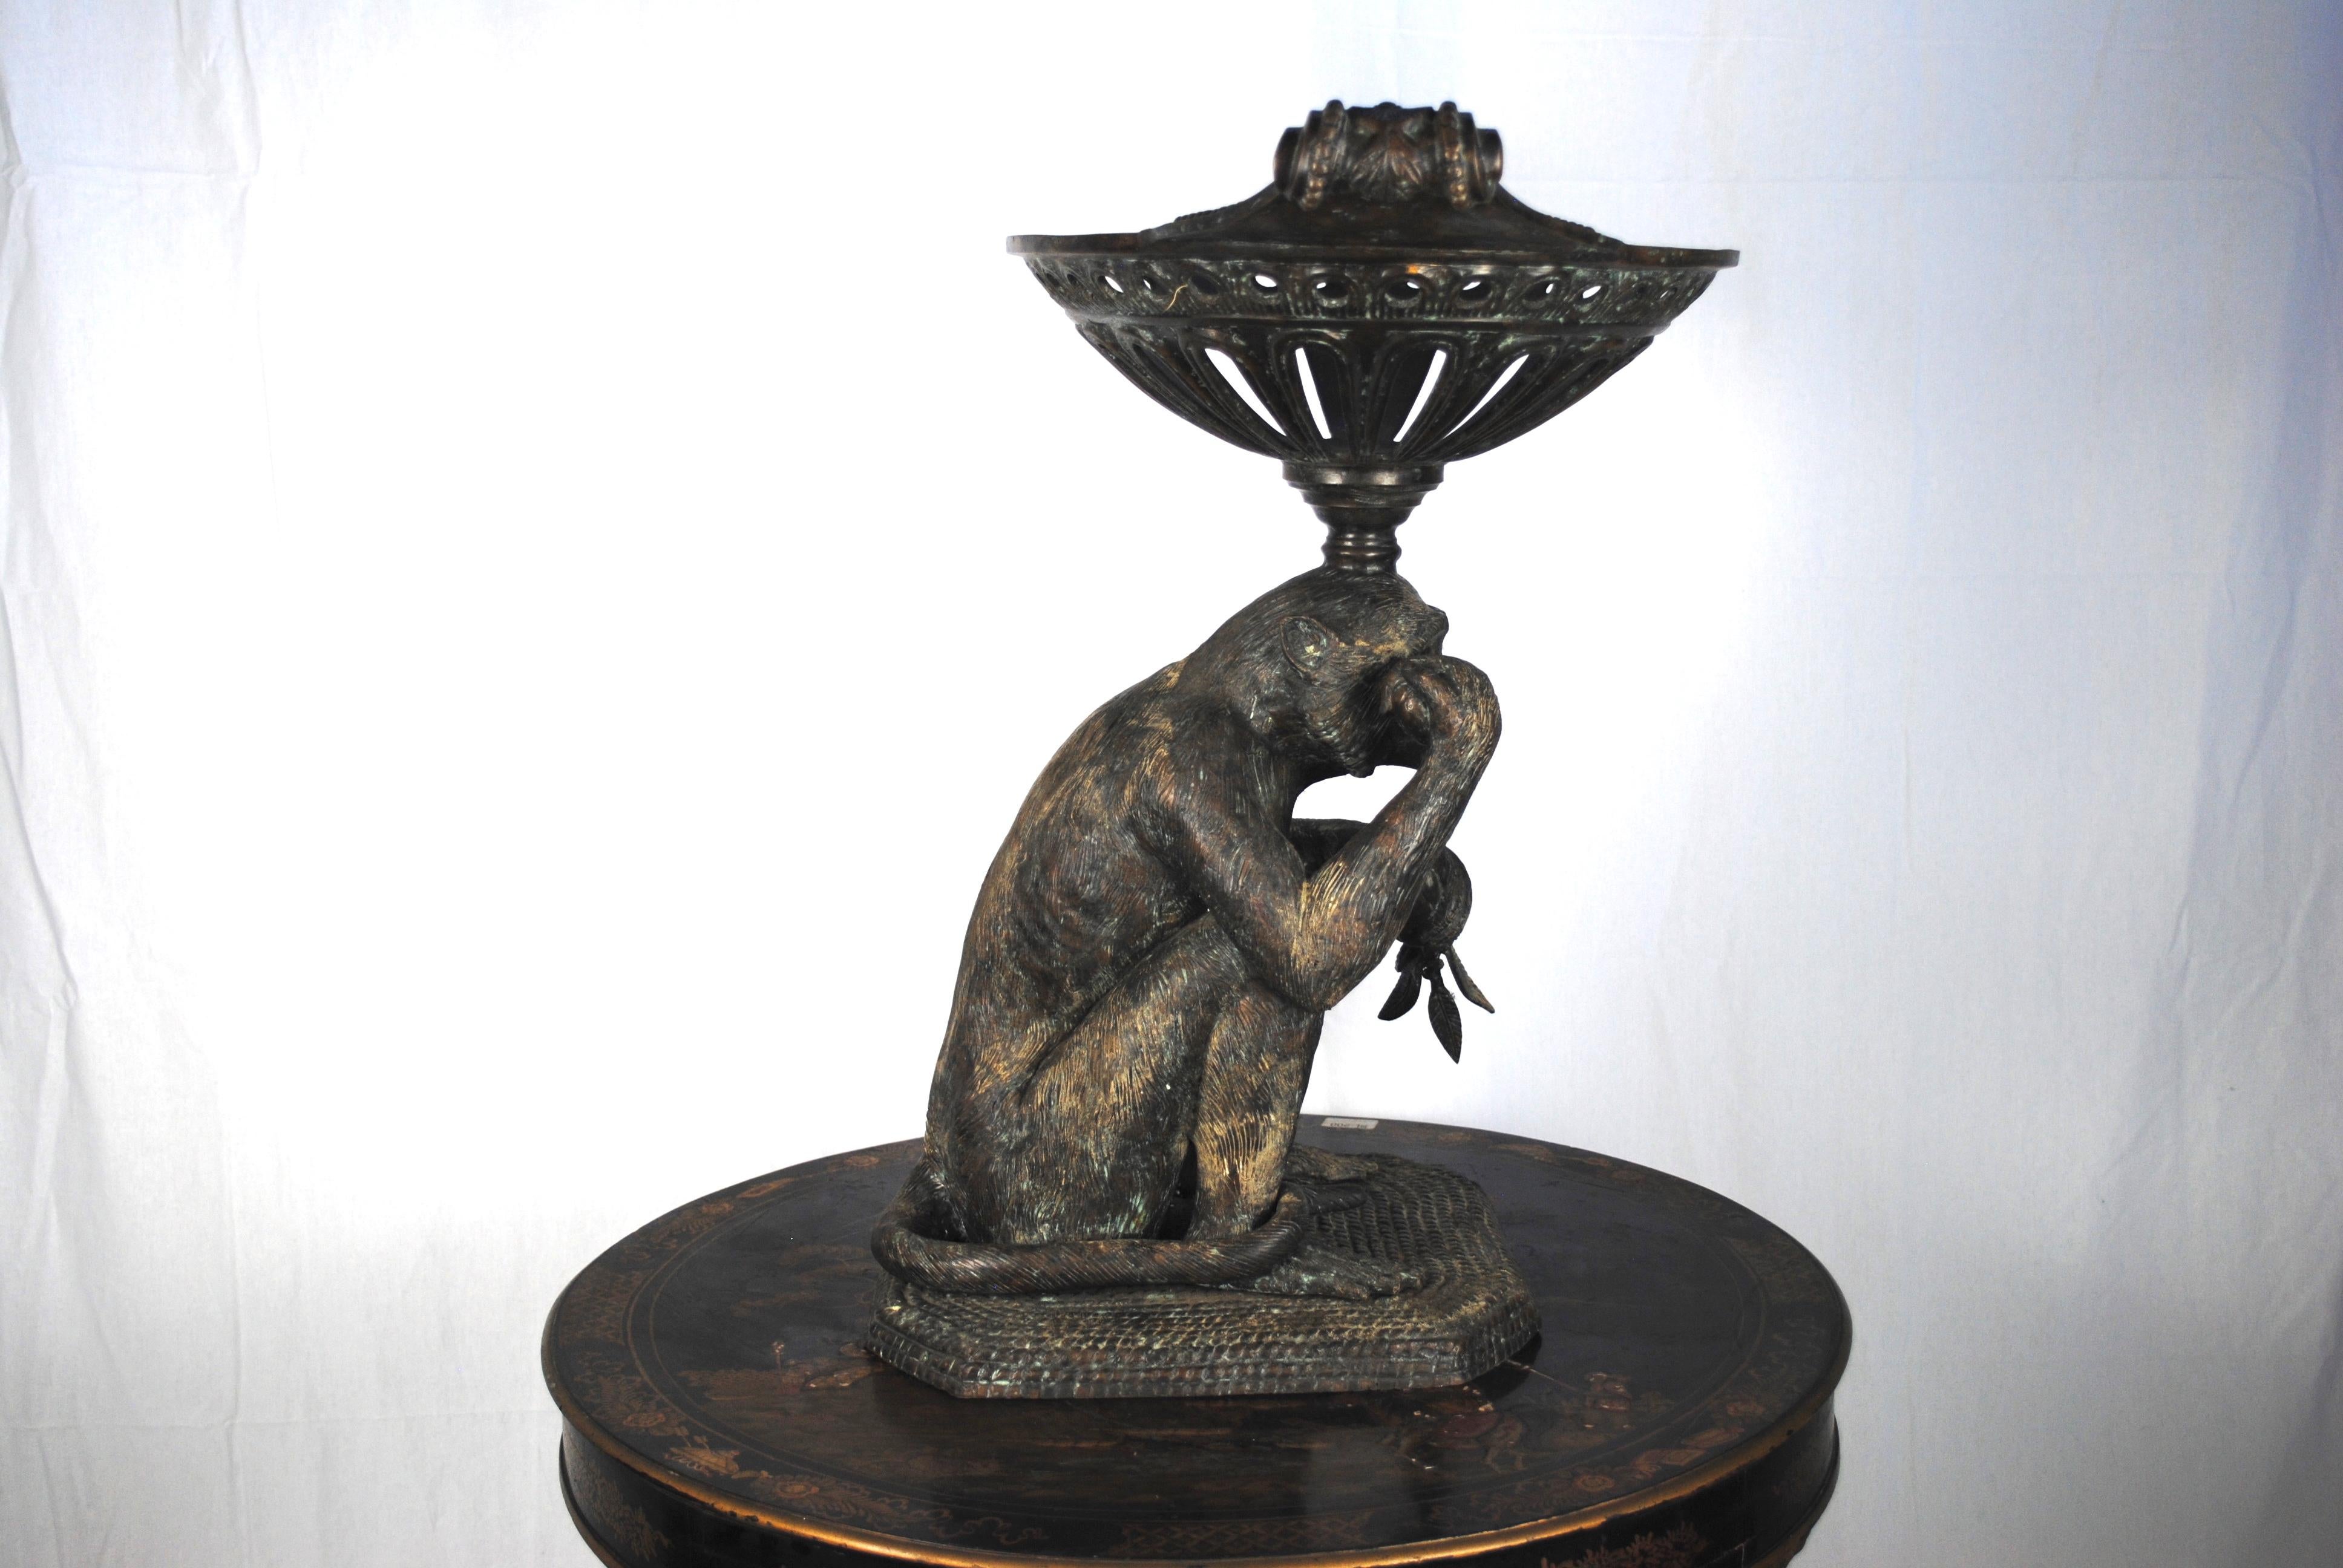 A 20th century bronze monkey with a bronze basket balanced on its head and holding a sprig of foliage in its hand.
A stunning centre piece for a reception or dining table. Could also be used as a garden ornament.
 